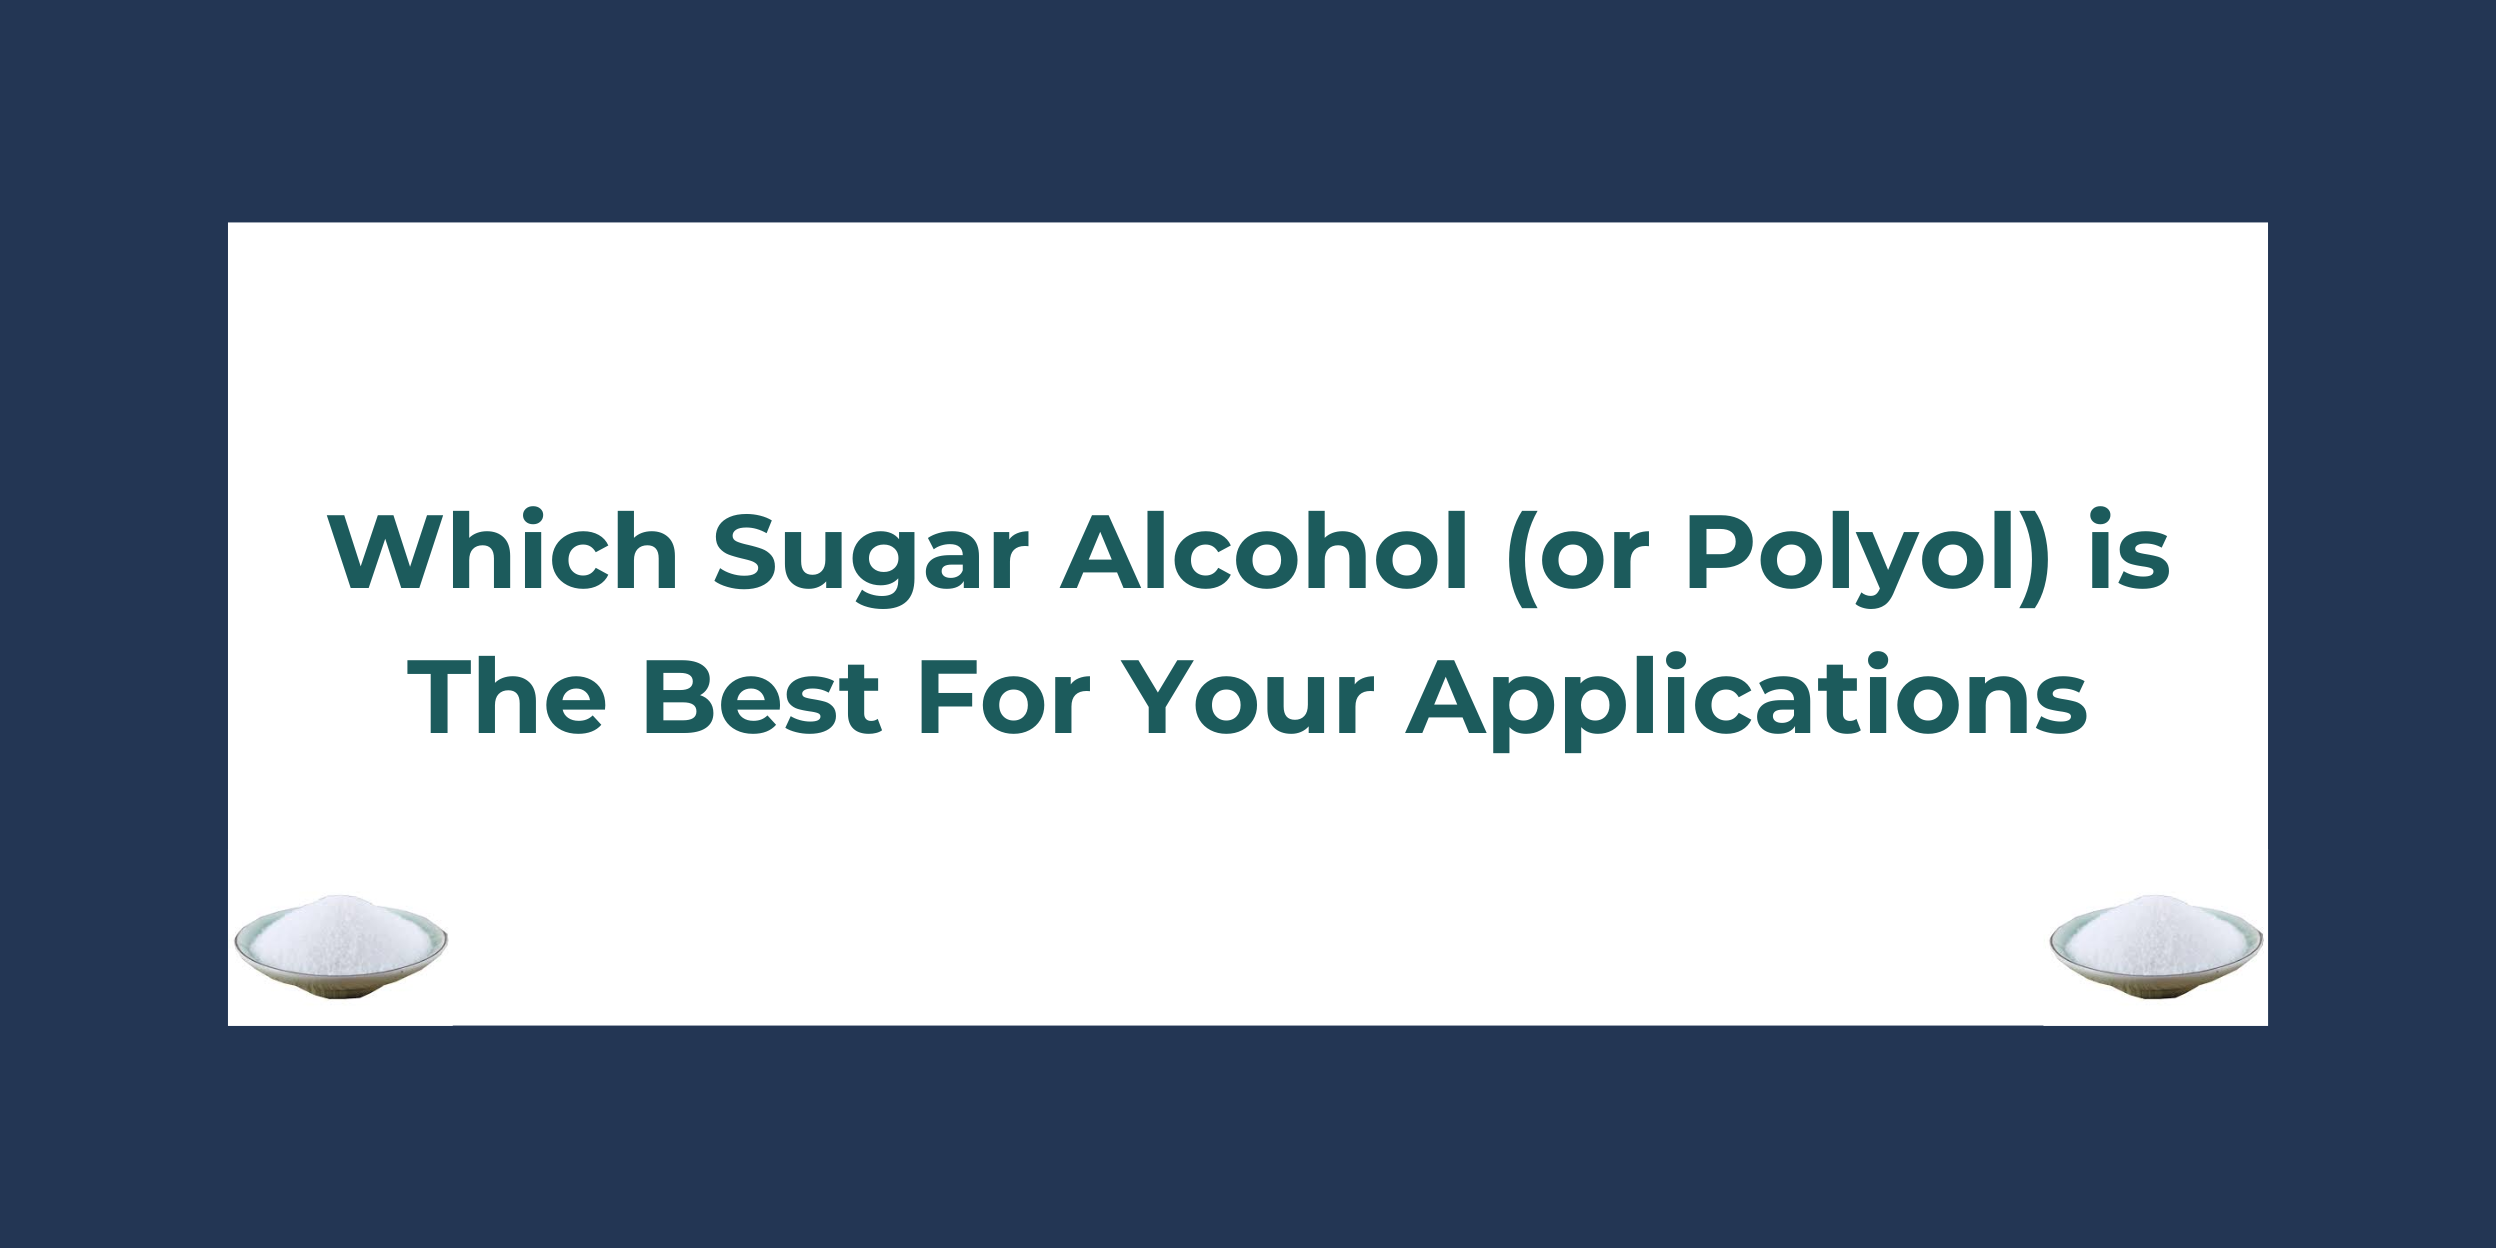 Which Sugar Alcohol (or Polyol) is The Best For Your Applications